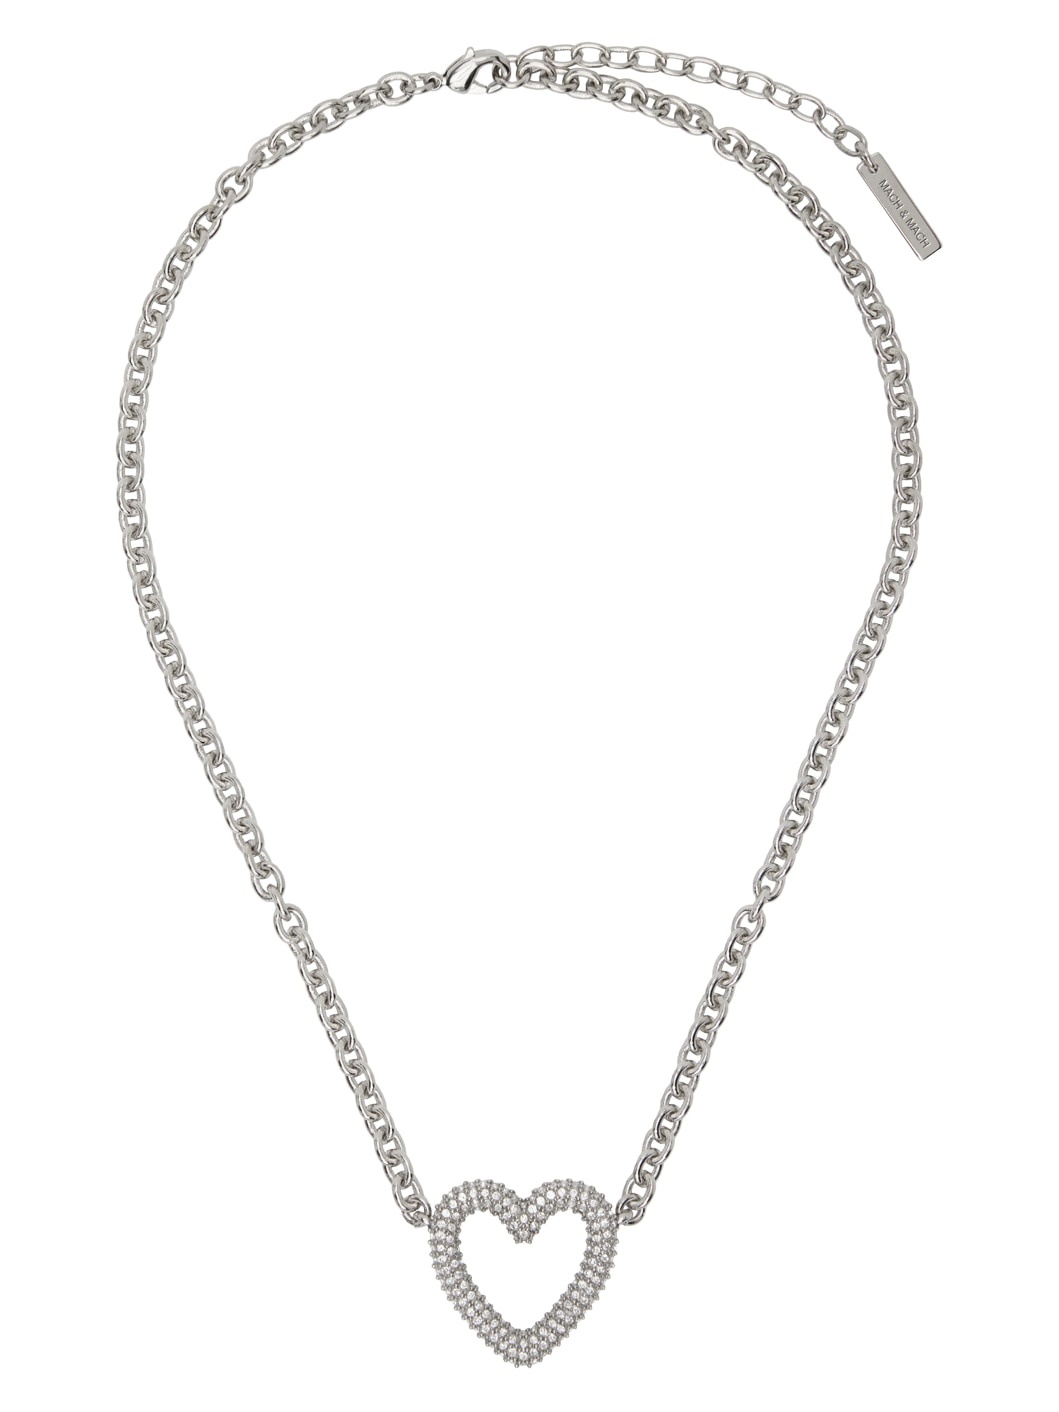 Silver Heart Necklace - 1